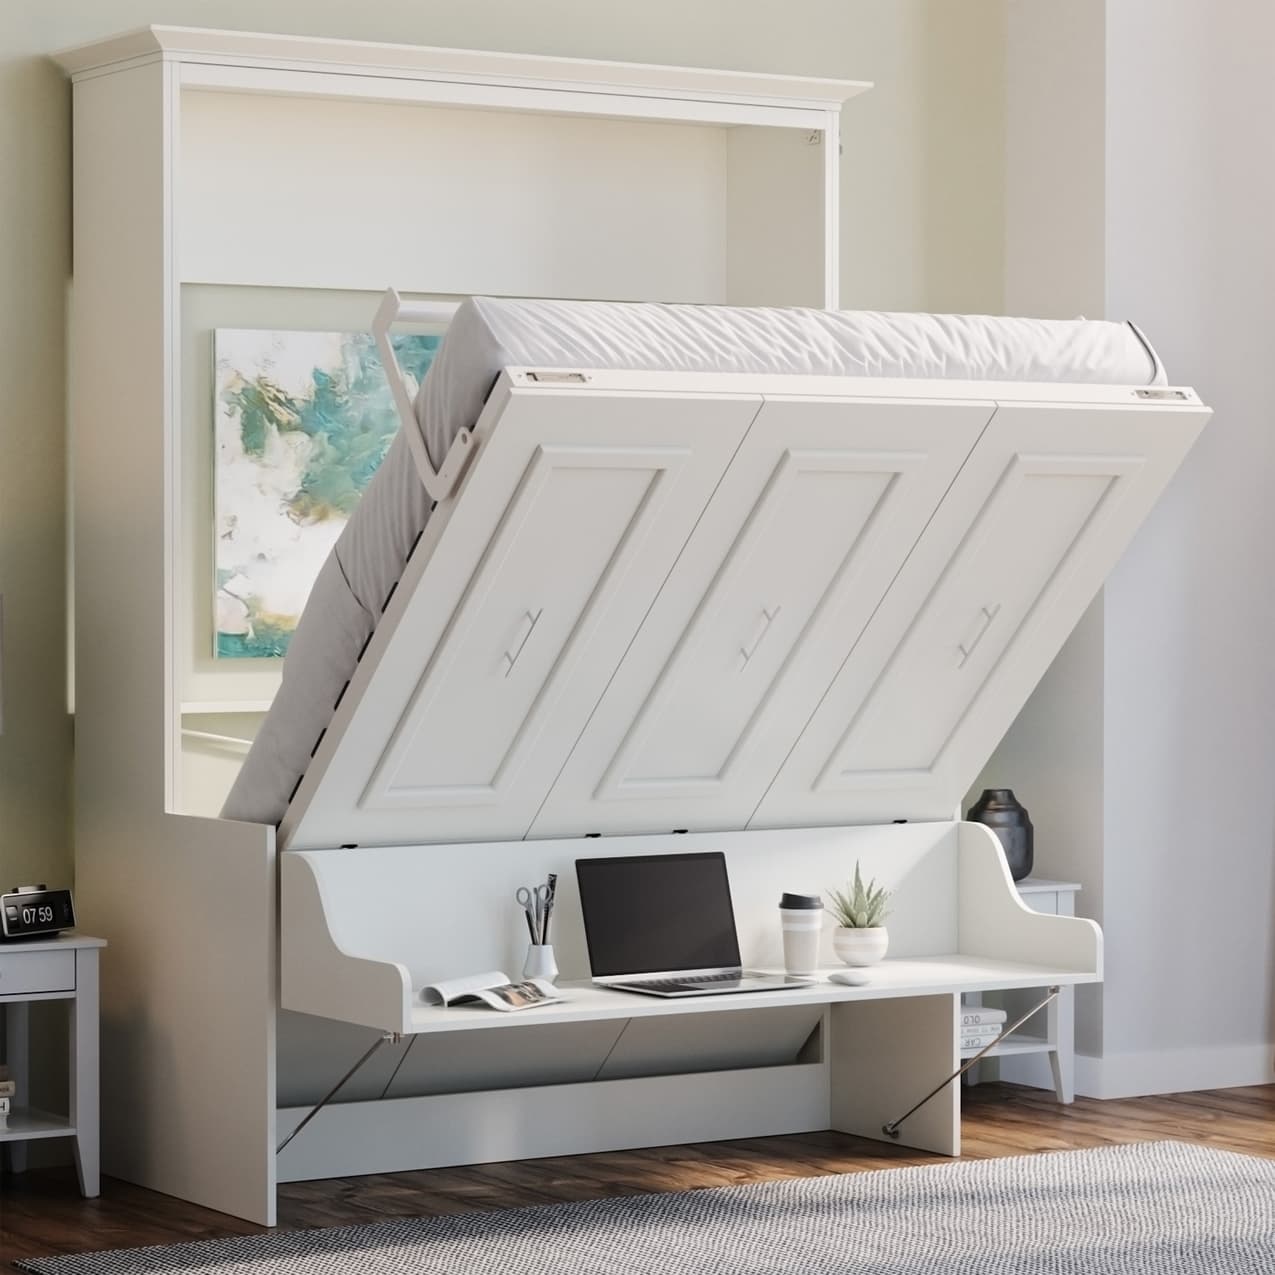 Alegra full murphy bed with desk cabinet open at 45 degrees showing desk staying level hiden hide away hide-a-way diy murphy bed kit fold out pull down home office best bed wall bed cabinet